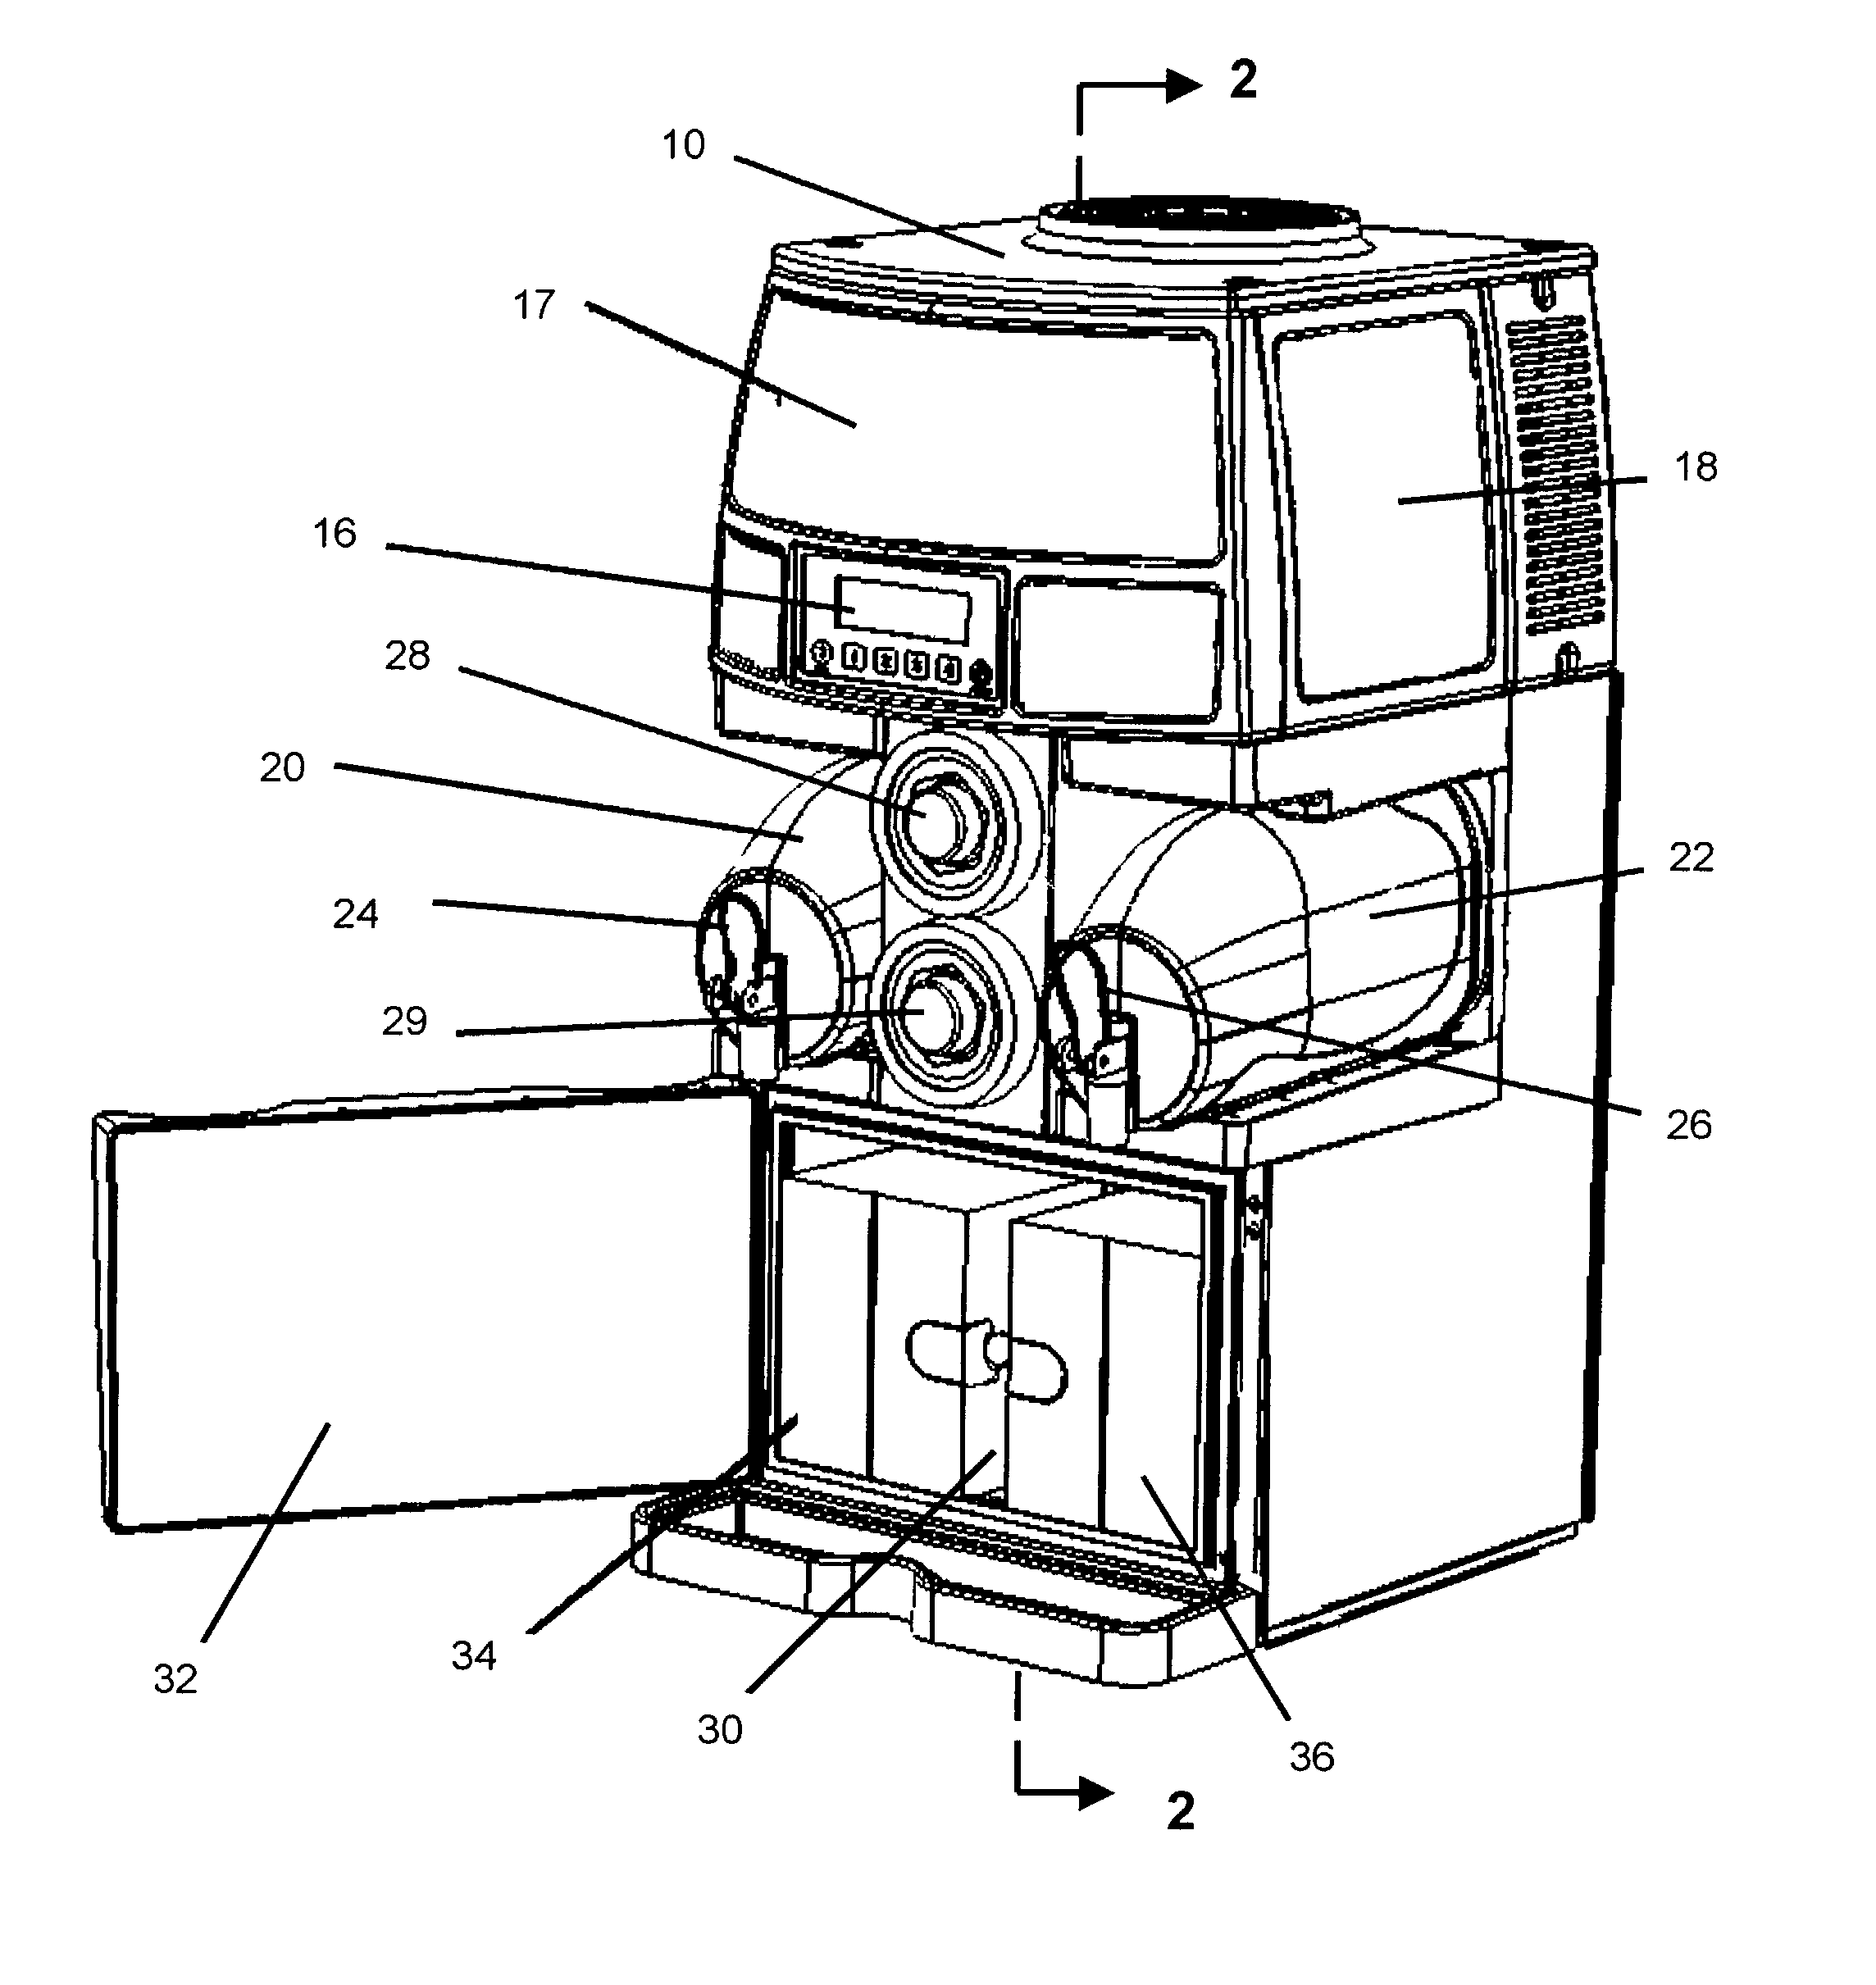 Method and apparatus to control a beverage or dessert dispenser